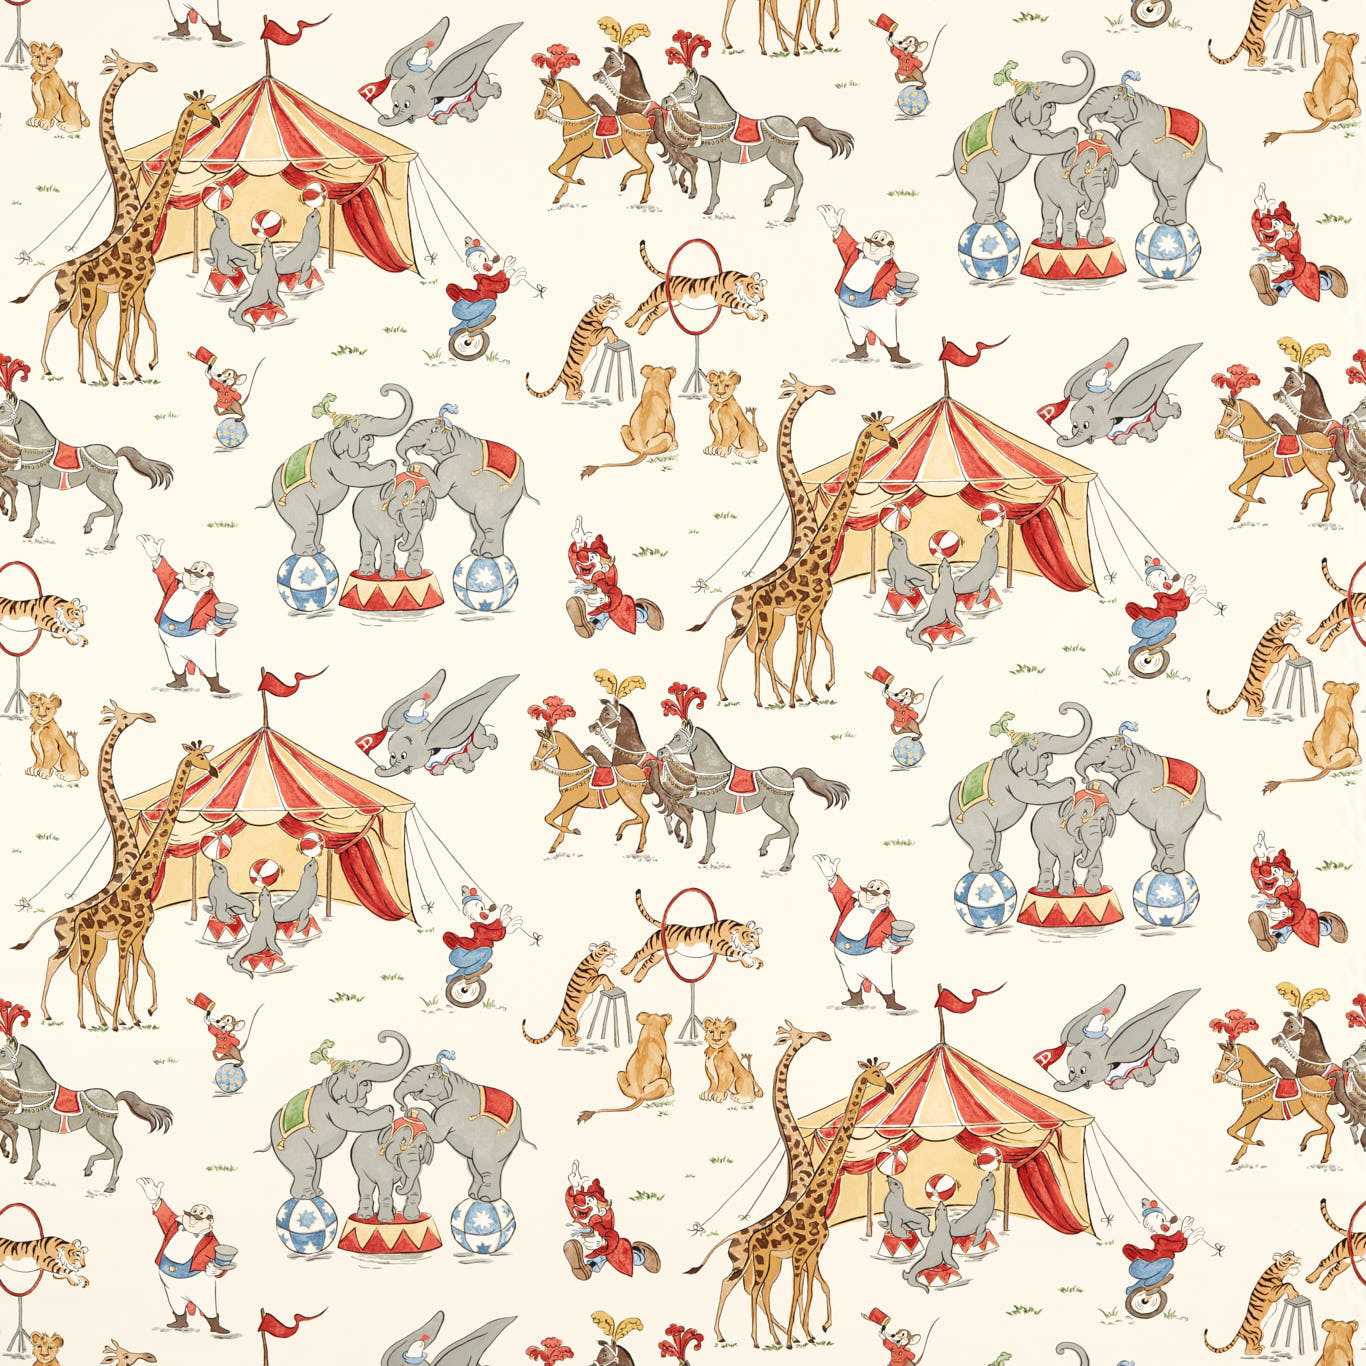 Dumbo Peanut Butter and Jelly Fabric By Sanderson